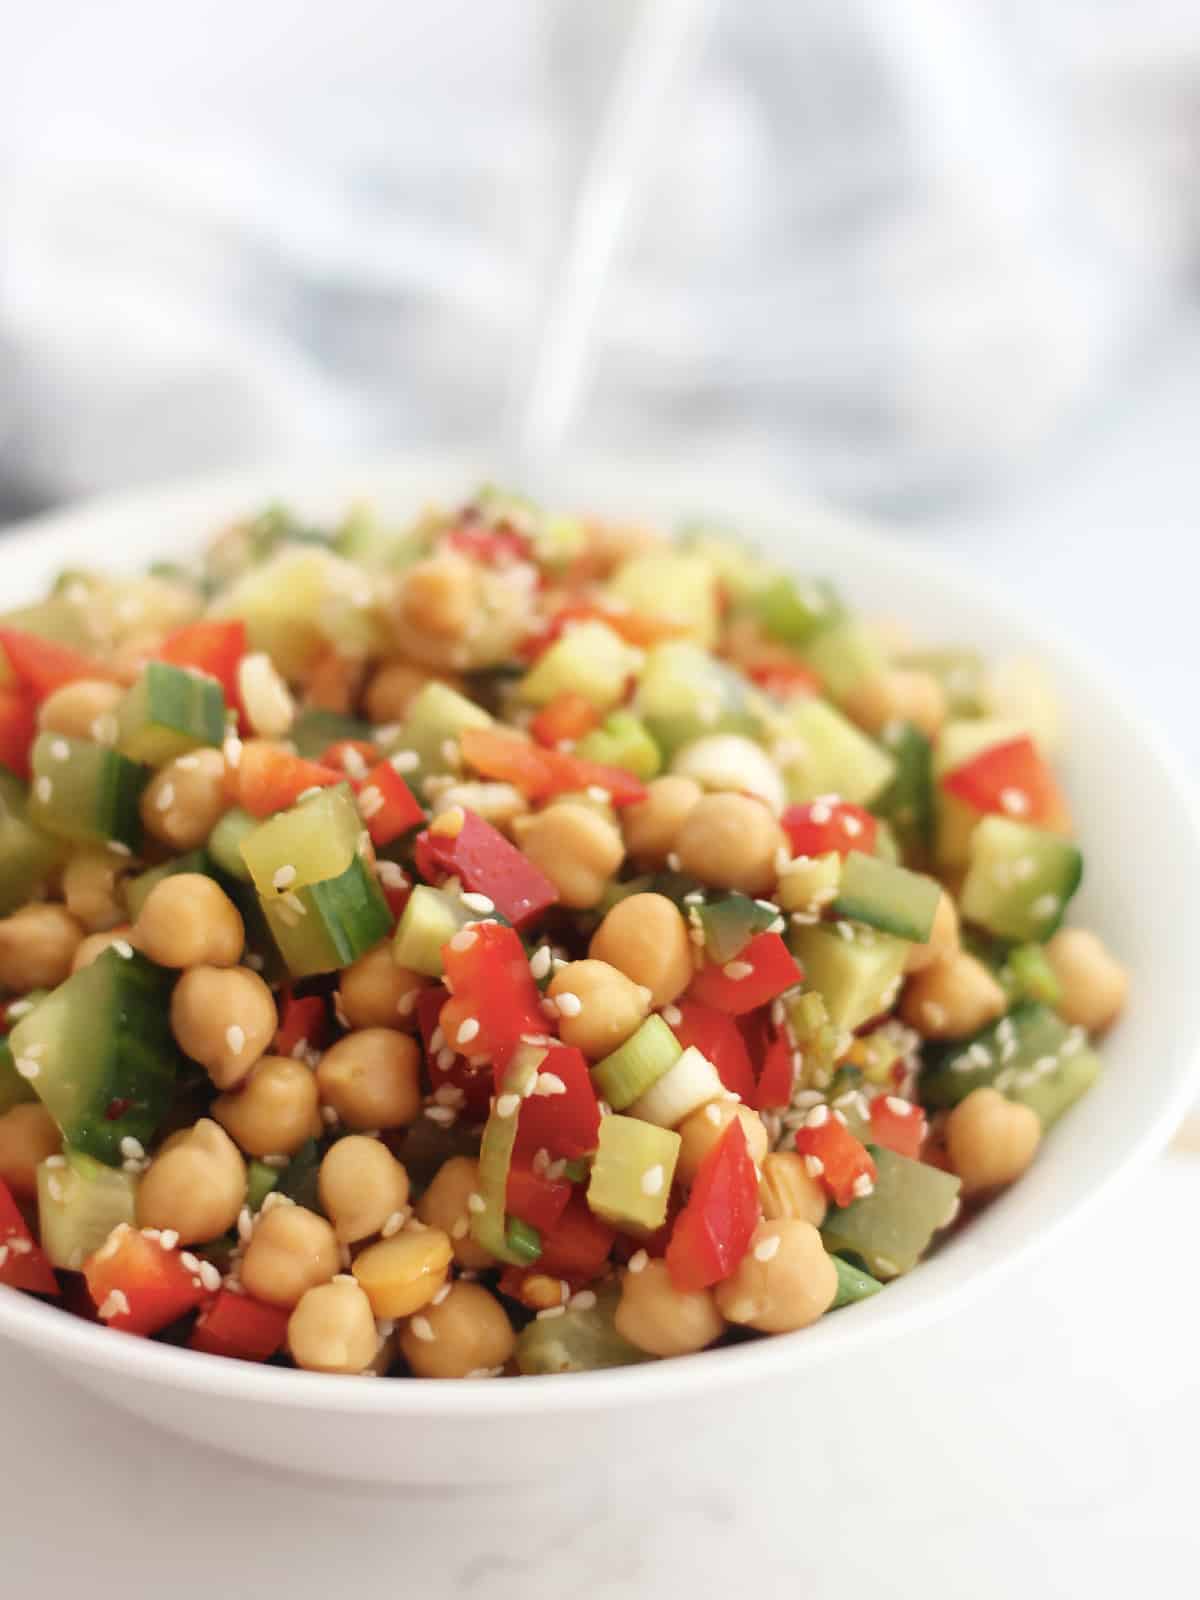 Asian chickpea salad served in a white bowl.